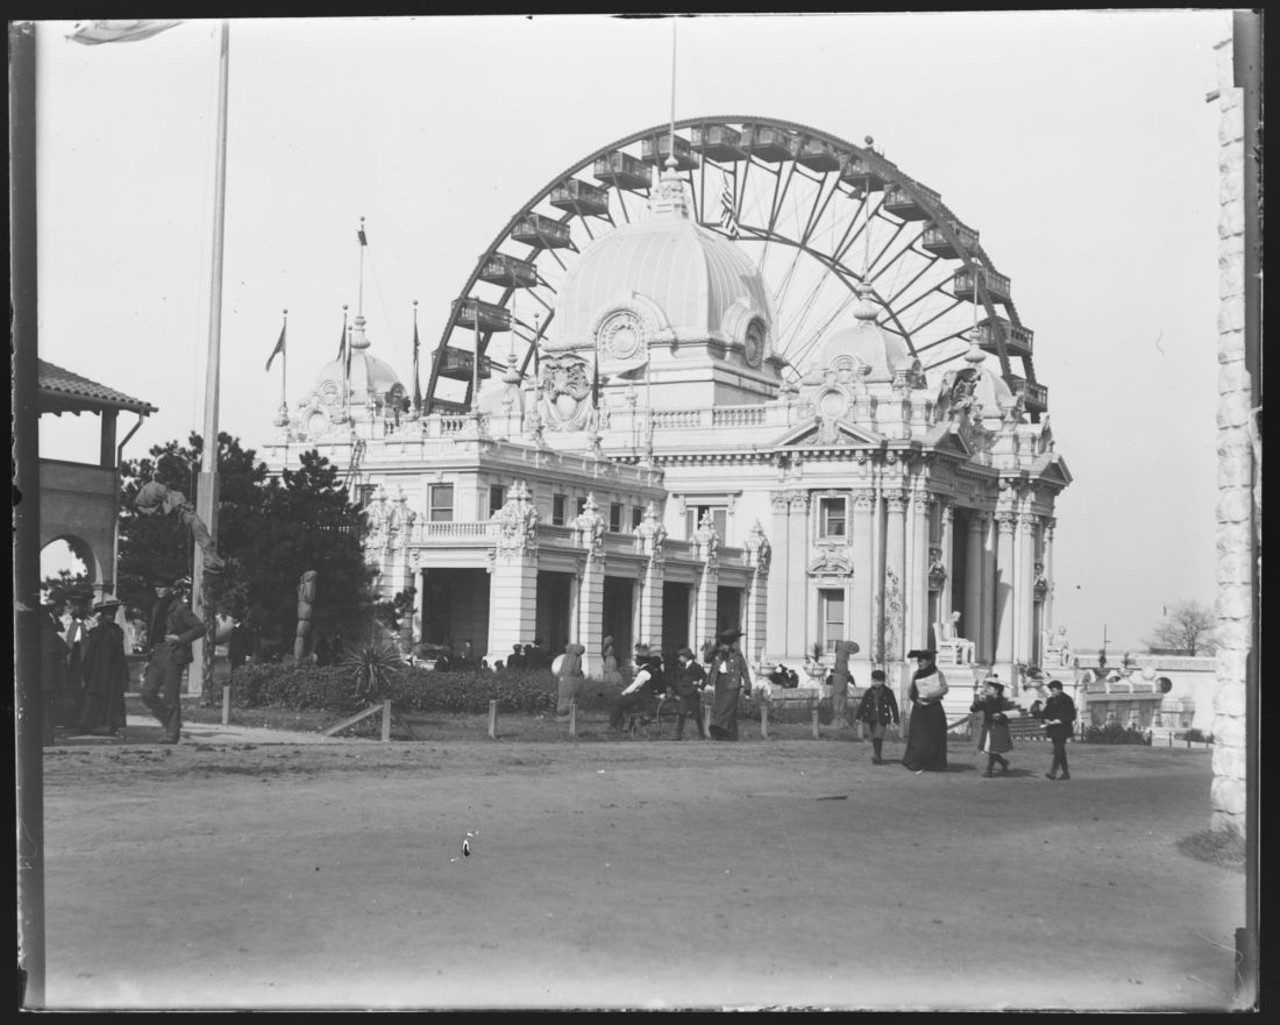 1904 WORLD'S FAIR ILLINOIS BUILDING WITH FERRIS WHEEL BEHIND
Find out more about this photo at MoHistory.org.